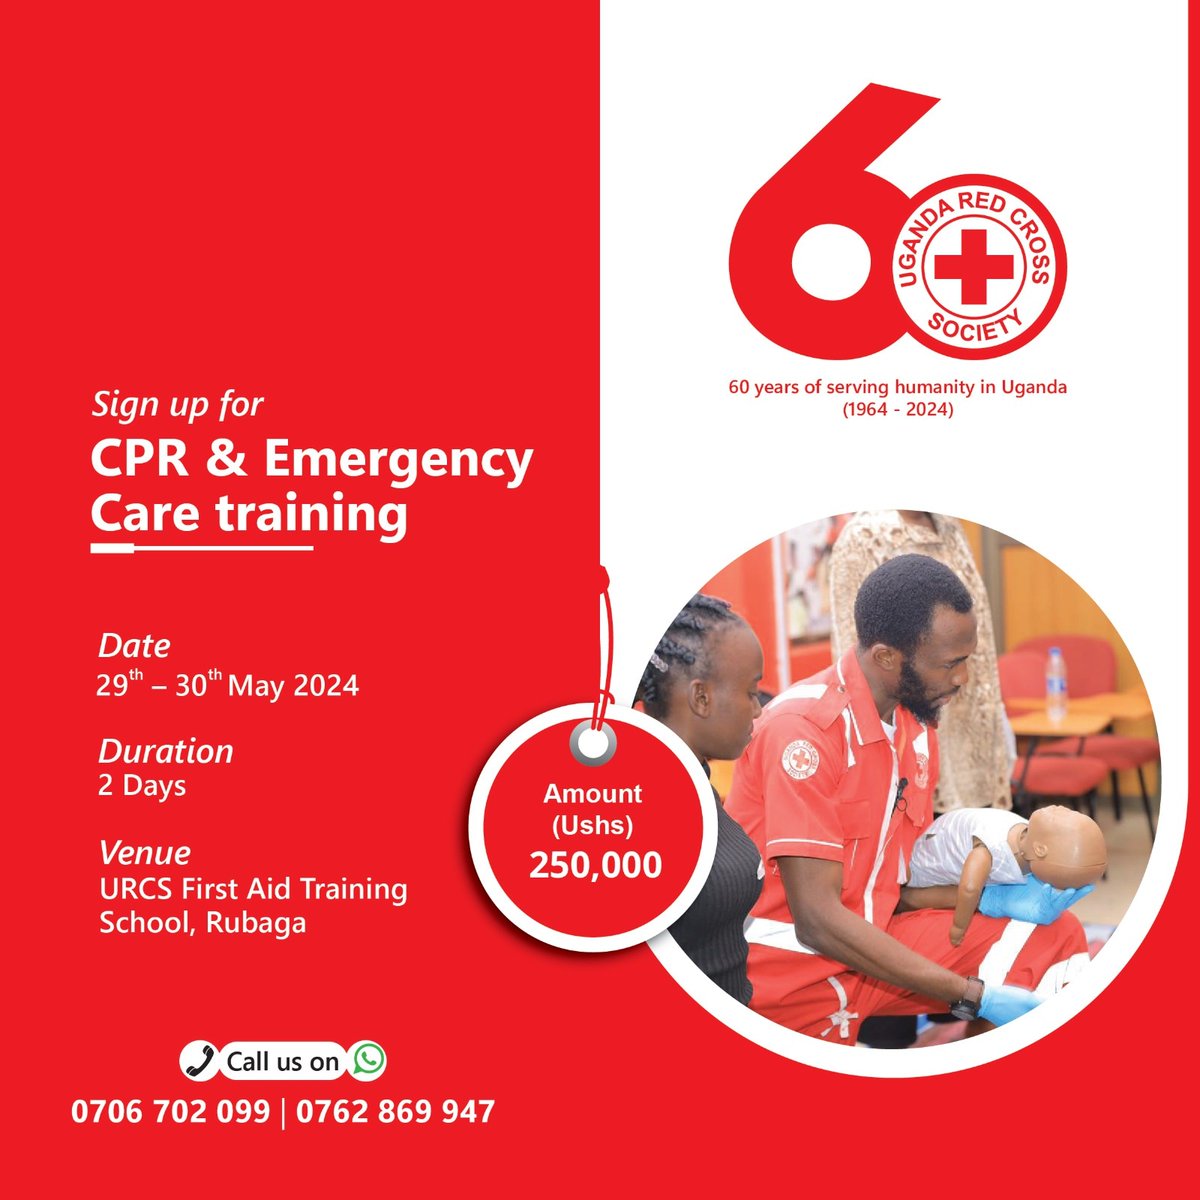 Only a few days left until our next CPR & Emergency care training. Have you registered yet? Don't miss out on this opportunity to learn lifesaving skills and become certified in CPR and emergency care! Secure your spot today and be prepared to learn how to save a life.